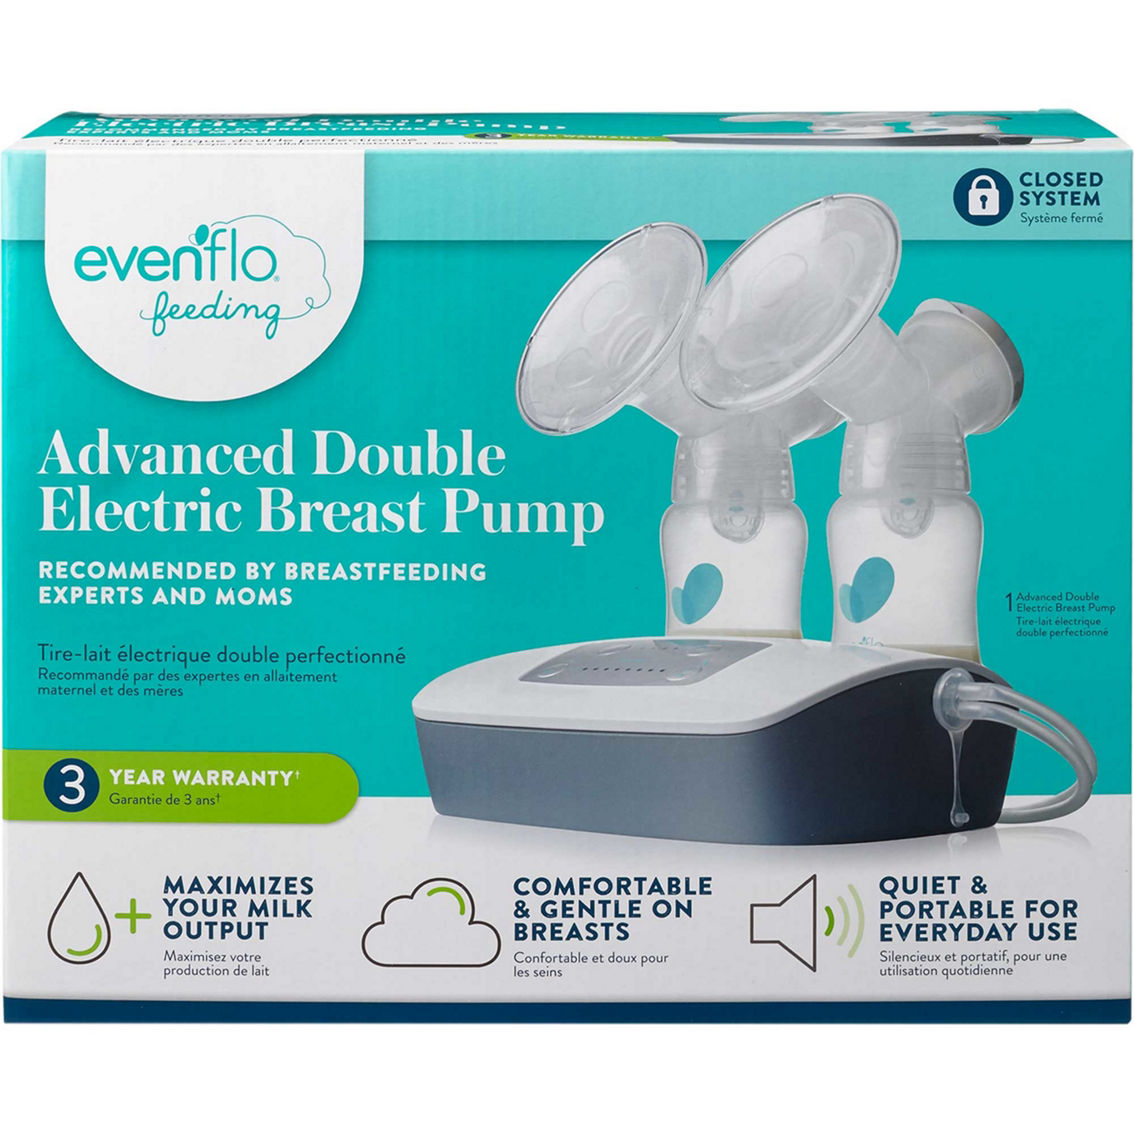 Evenflo Advanced Double Electric Breast Pump - Image 3 of 3